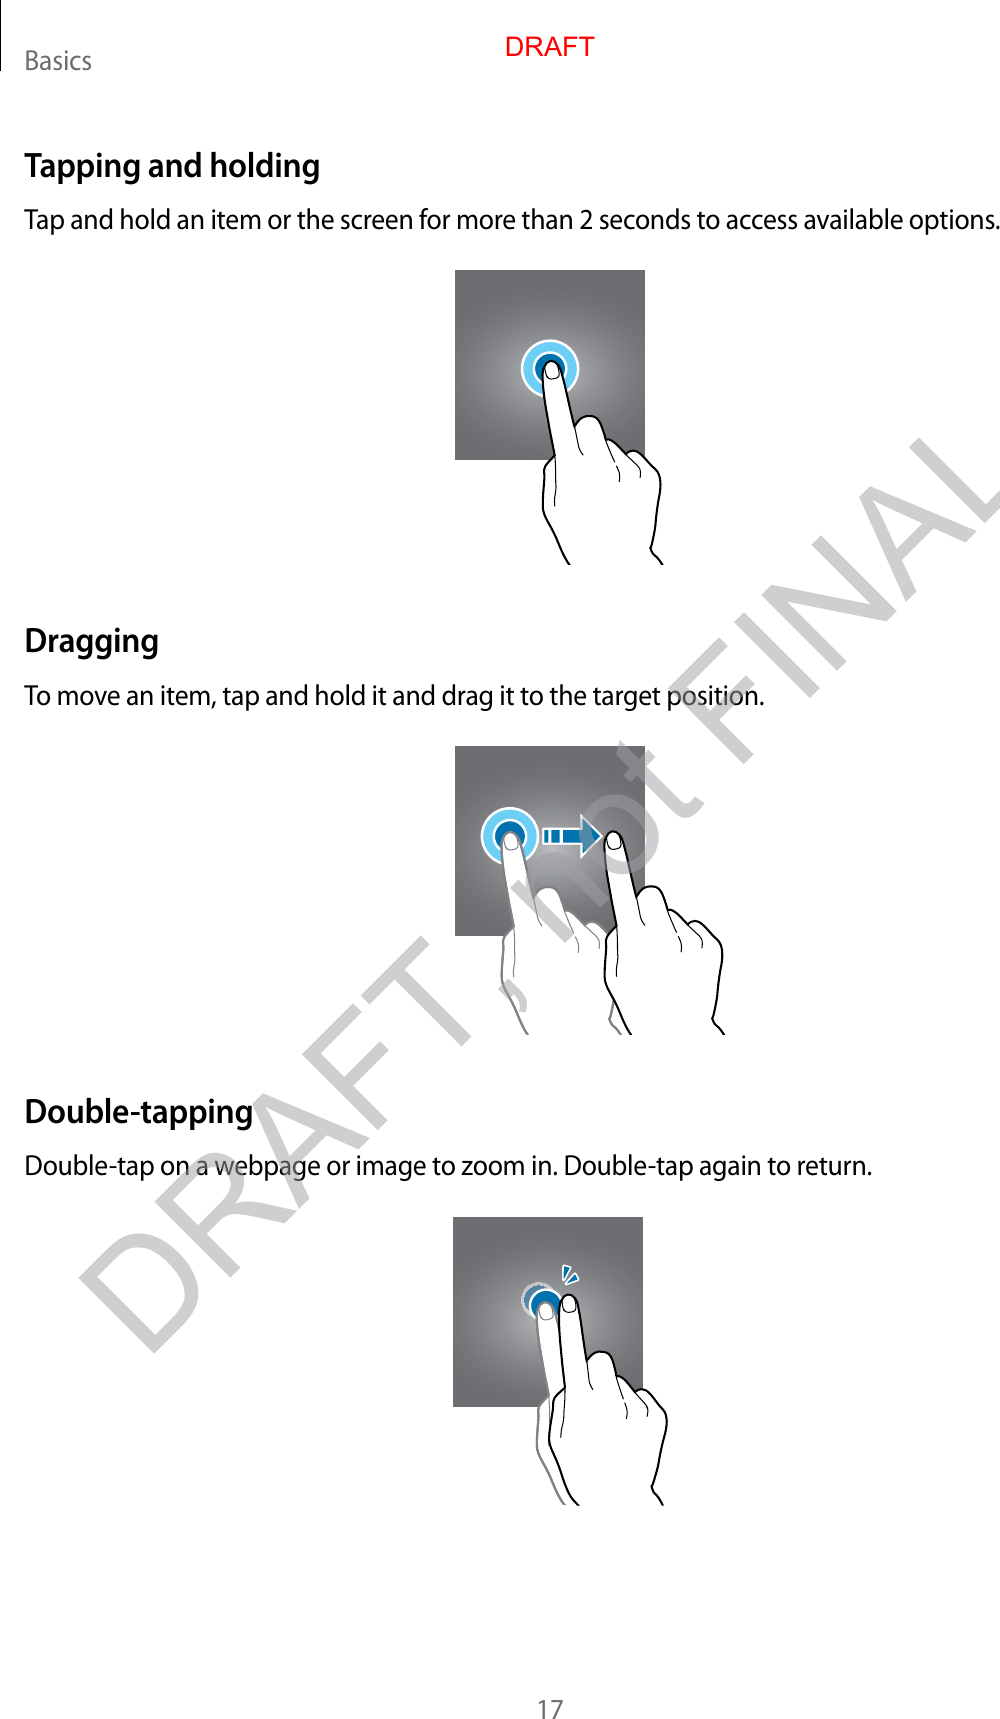 Basics17Tapping and holdingTap and hold an item or the screen f or mor e than 2 sec onds to ac cess a v ailable options .DraggingTo move an it em, tap and hold it and dr ag it to the tar get position.Double-tappingDouble-tap on a webpage or image to zoom in. Double-tap again to return.DRAFT, not FINALDRAFT